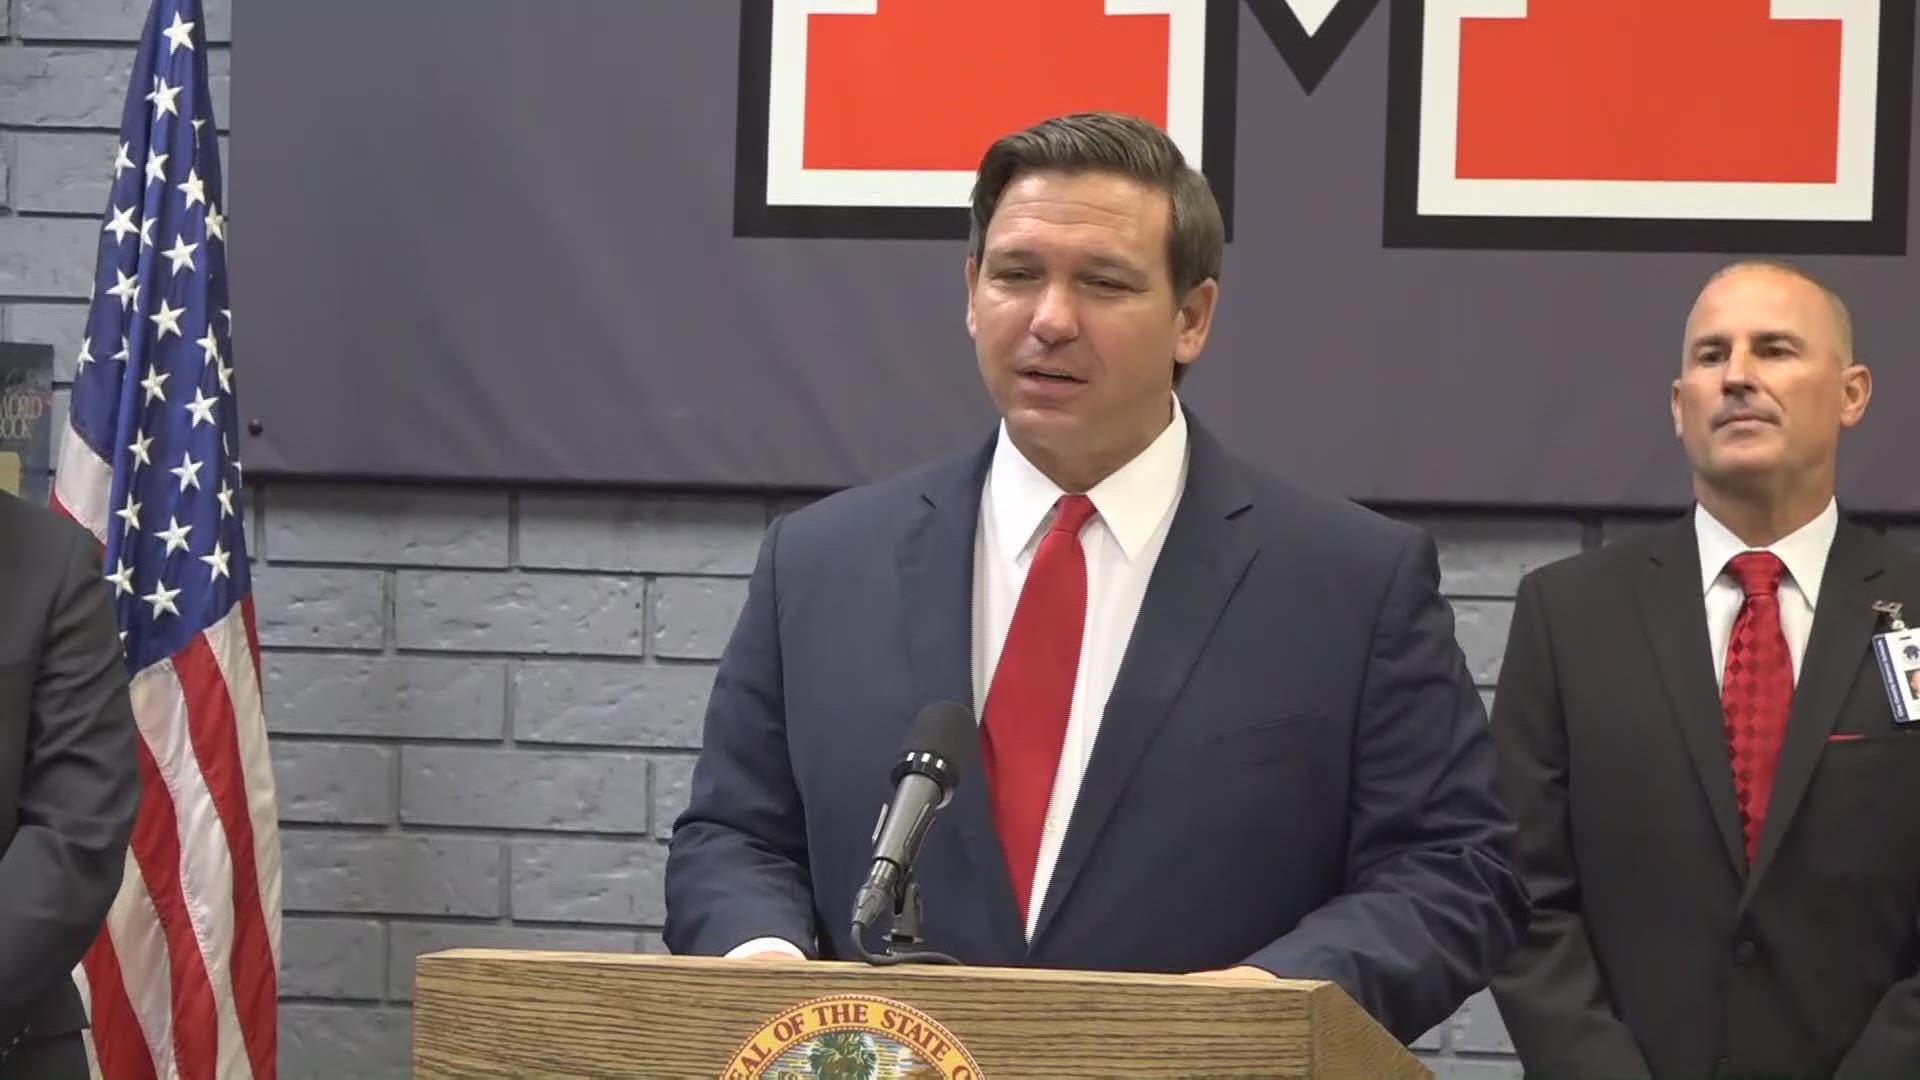 Gov. DeSantis announced Monday that he will be recommending a higher minimum starting salary for all Florida teachers during the next legislative session.